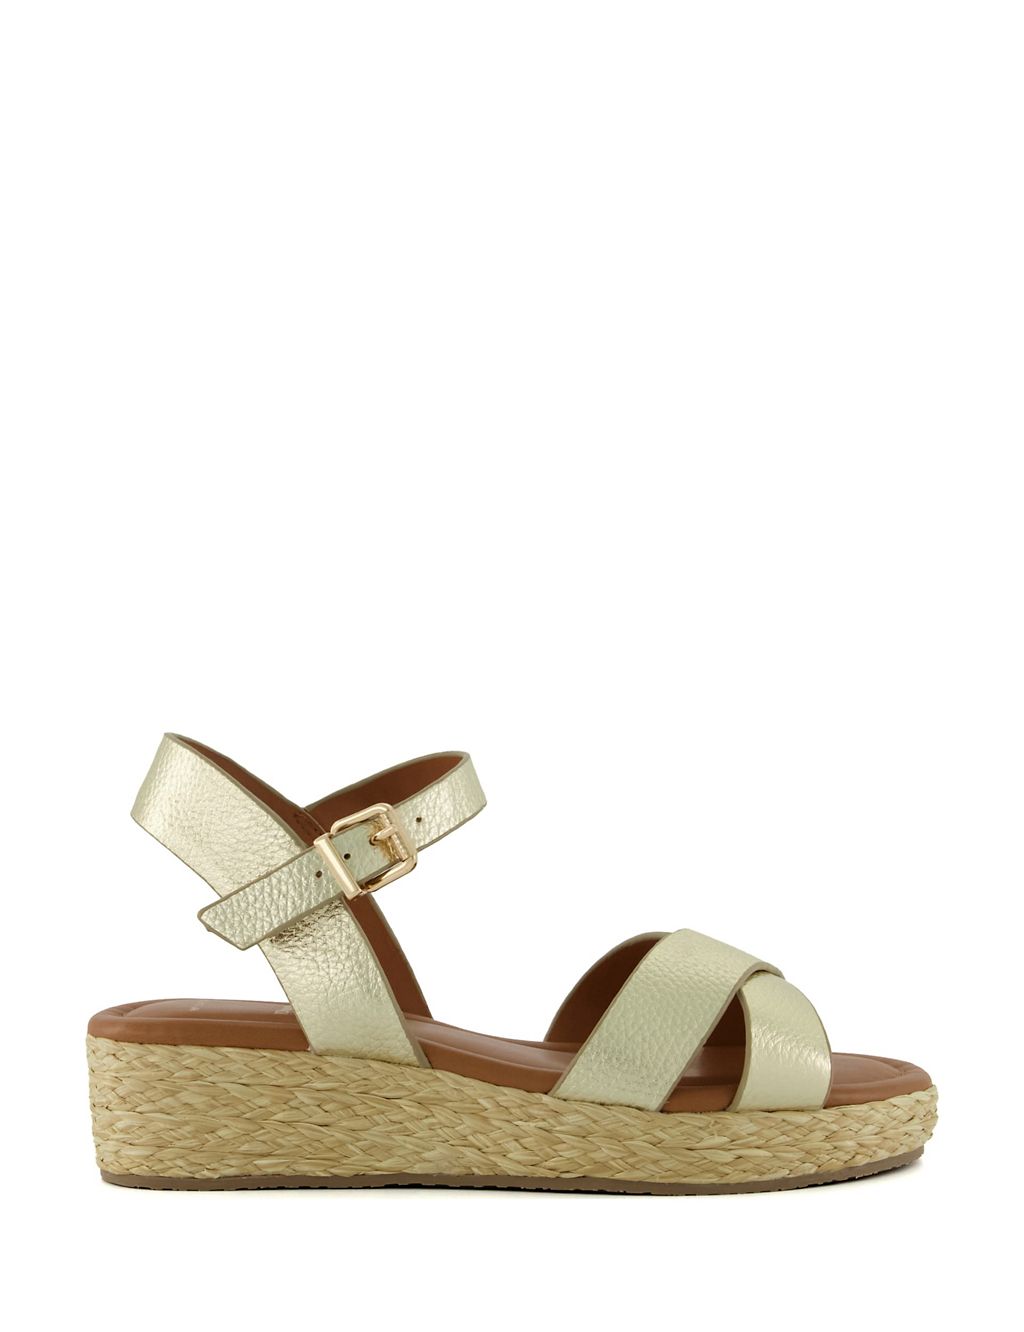 Wide Fit Leather Wedge Espadrilles 3 of 6